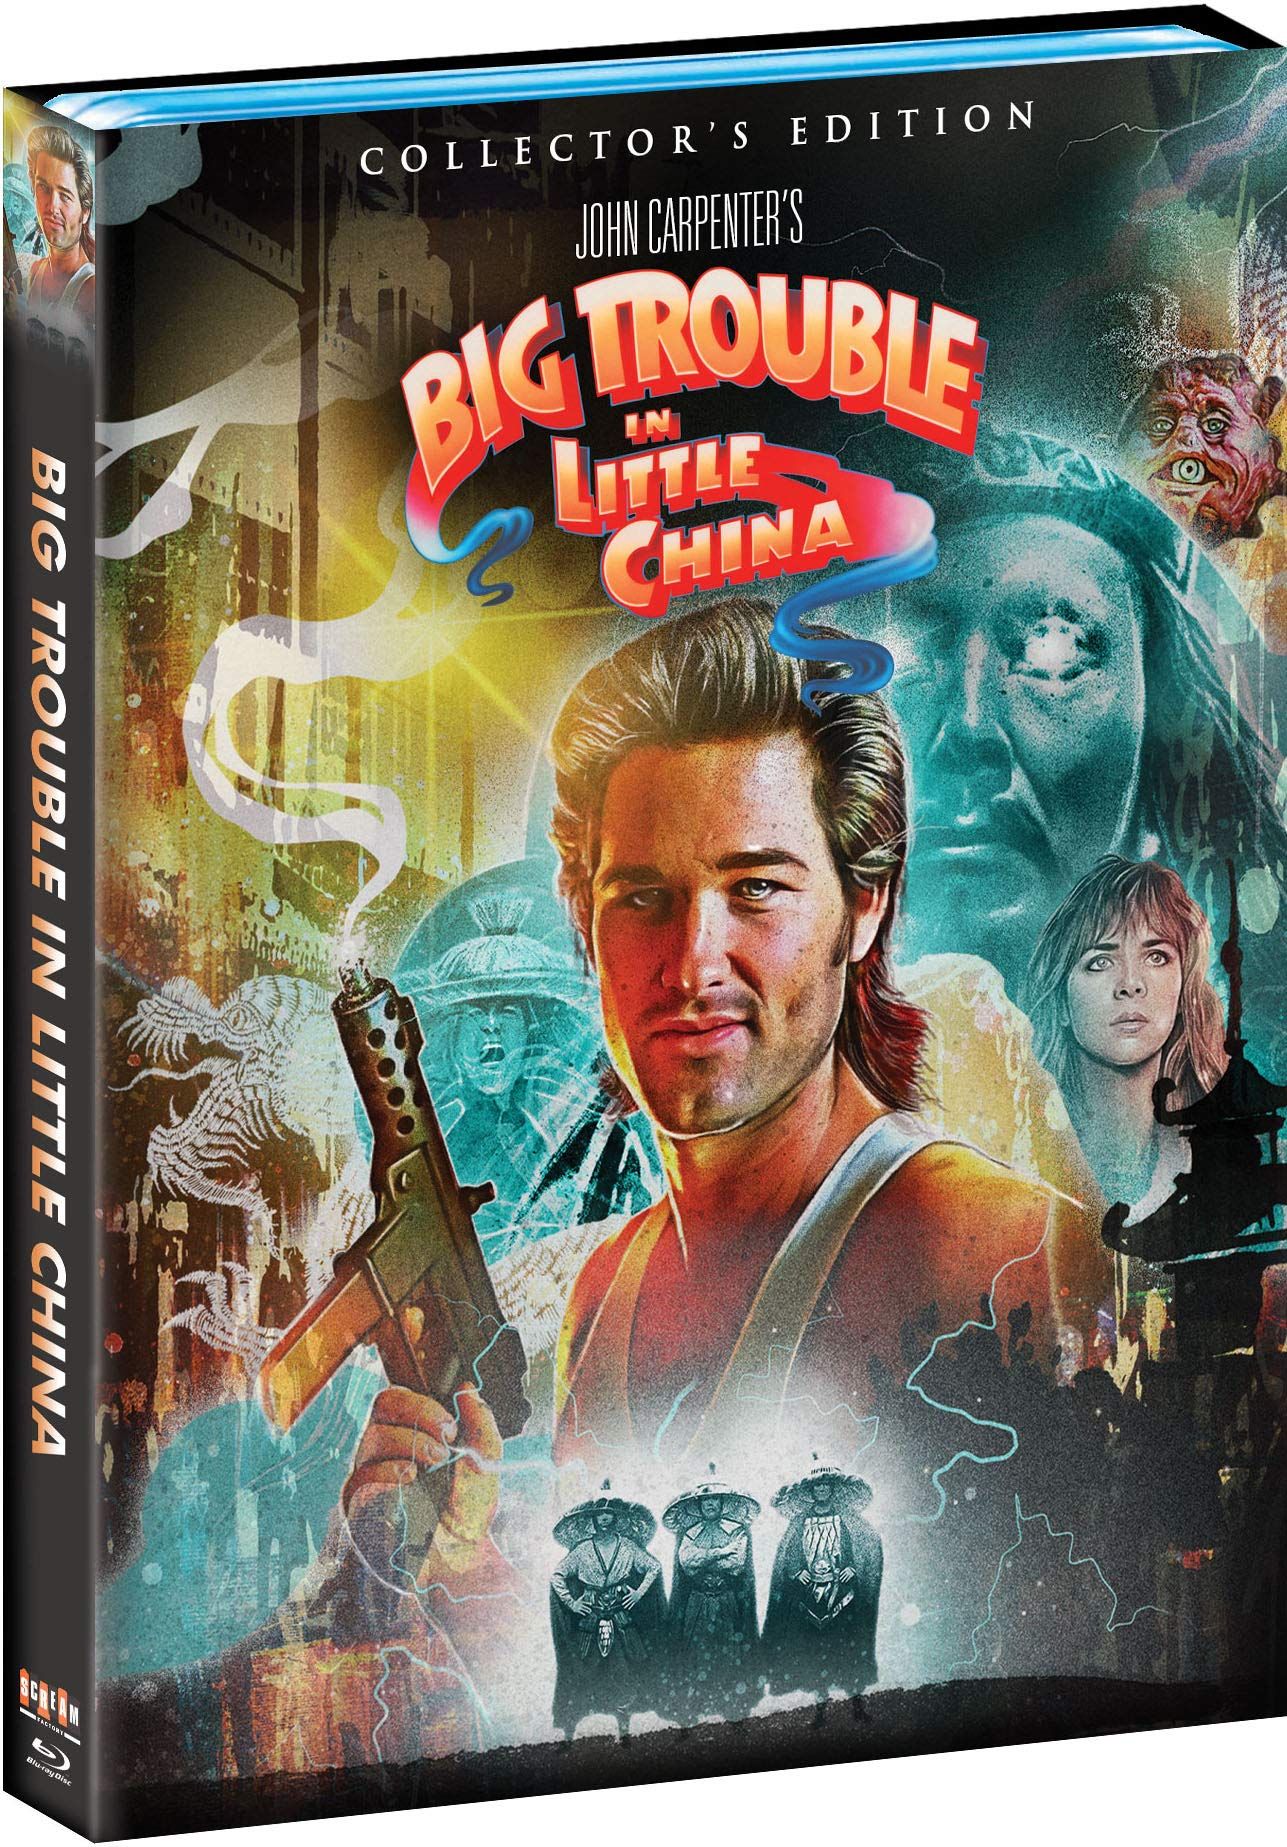 Big Trouble in Little China Collector's Edition